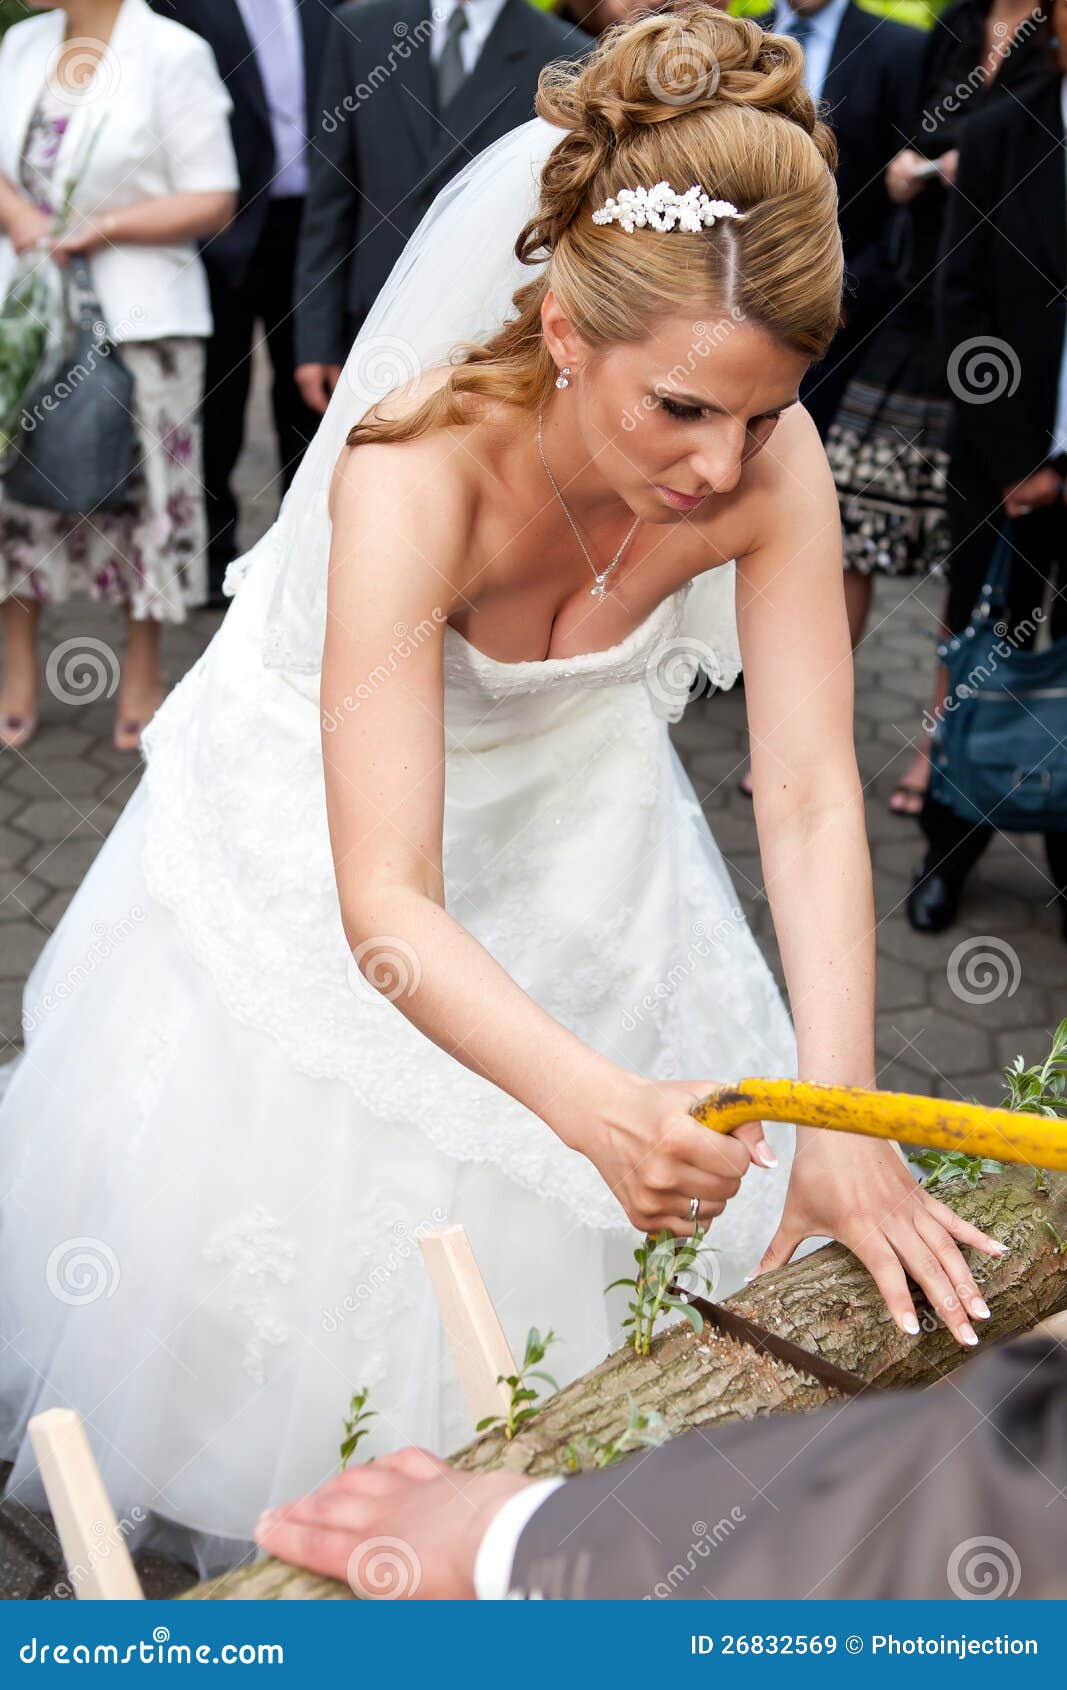  Bride Sawing Low With Saw Royalty Free Stock Images - Image: 26832569